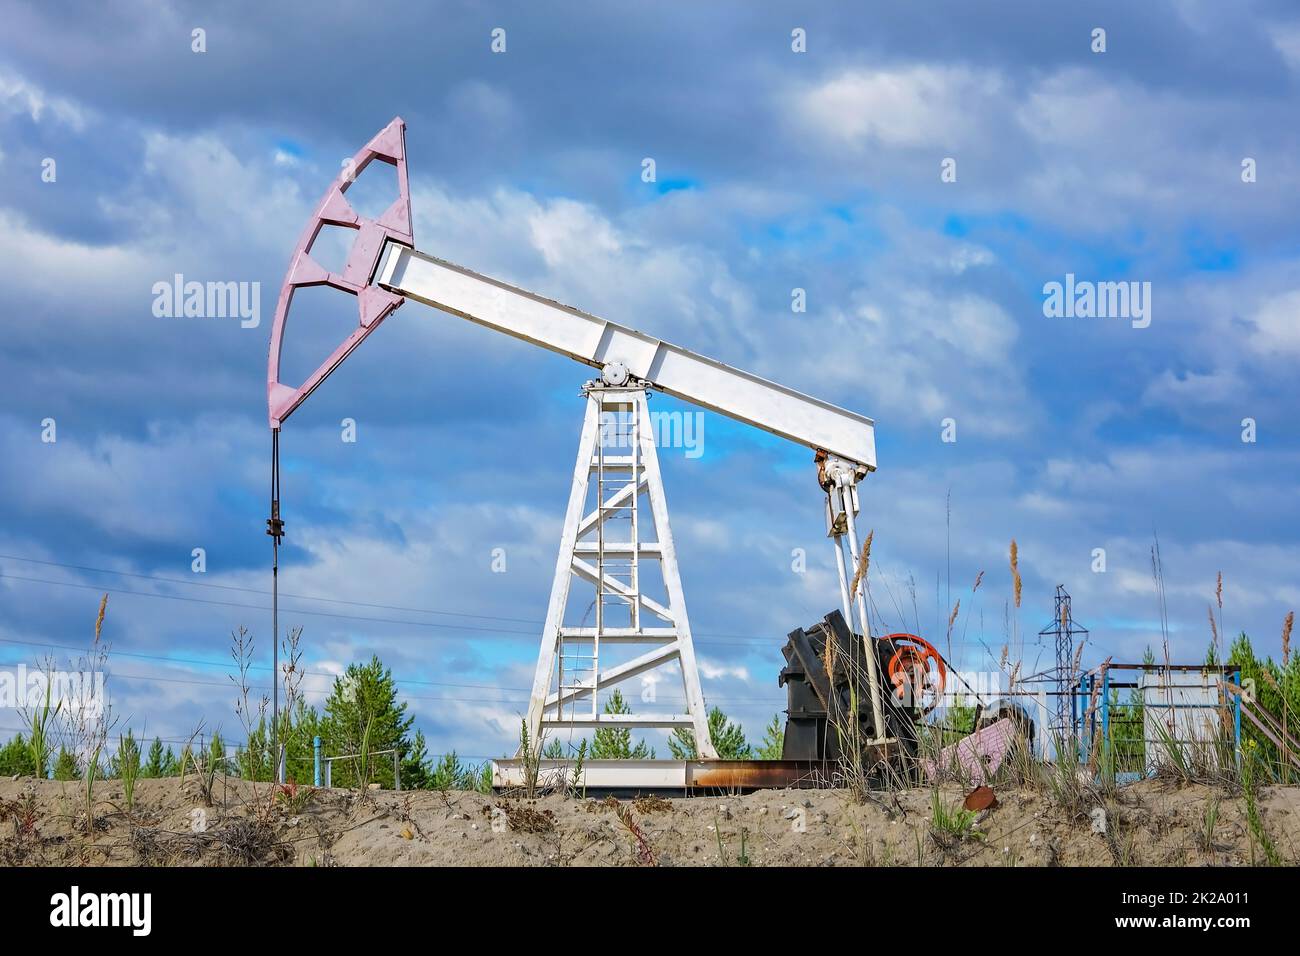 A single-shoulder rocking machine at an oil field. Oil and gas production. Stock Photo